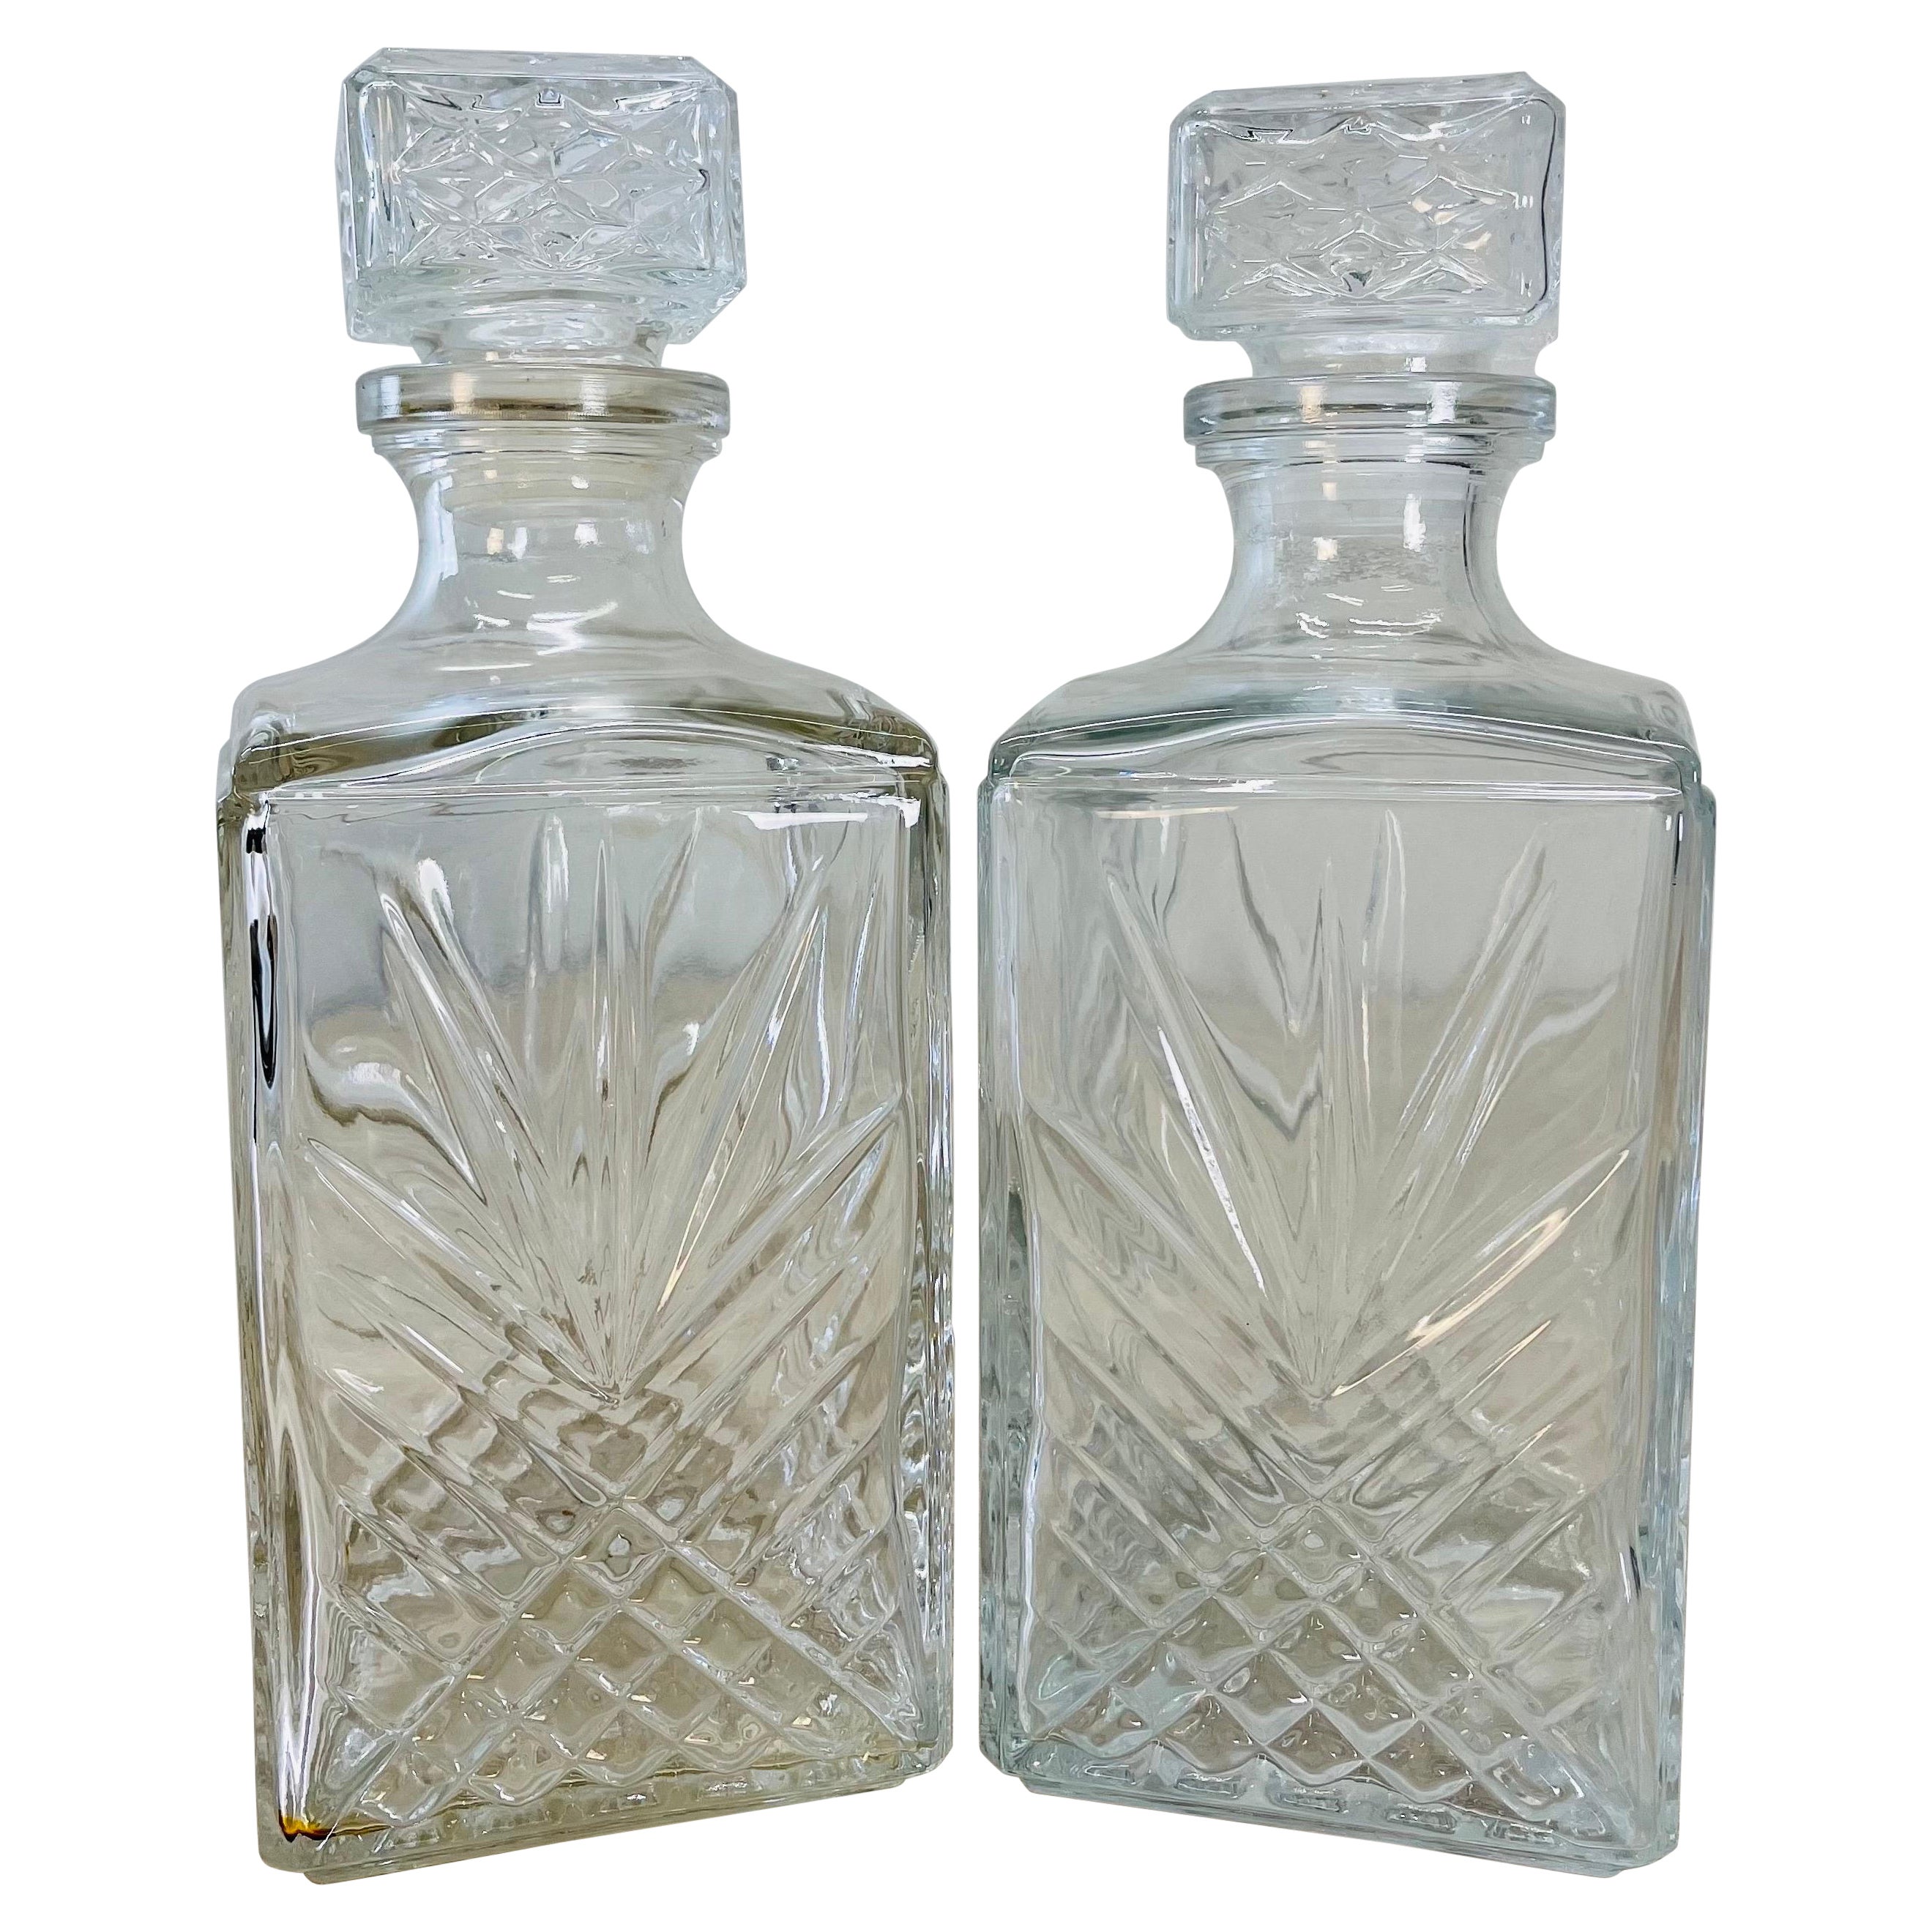 1960s, Square Glass Decanters, Pair For Sale